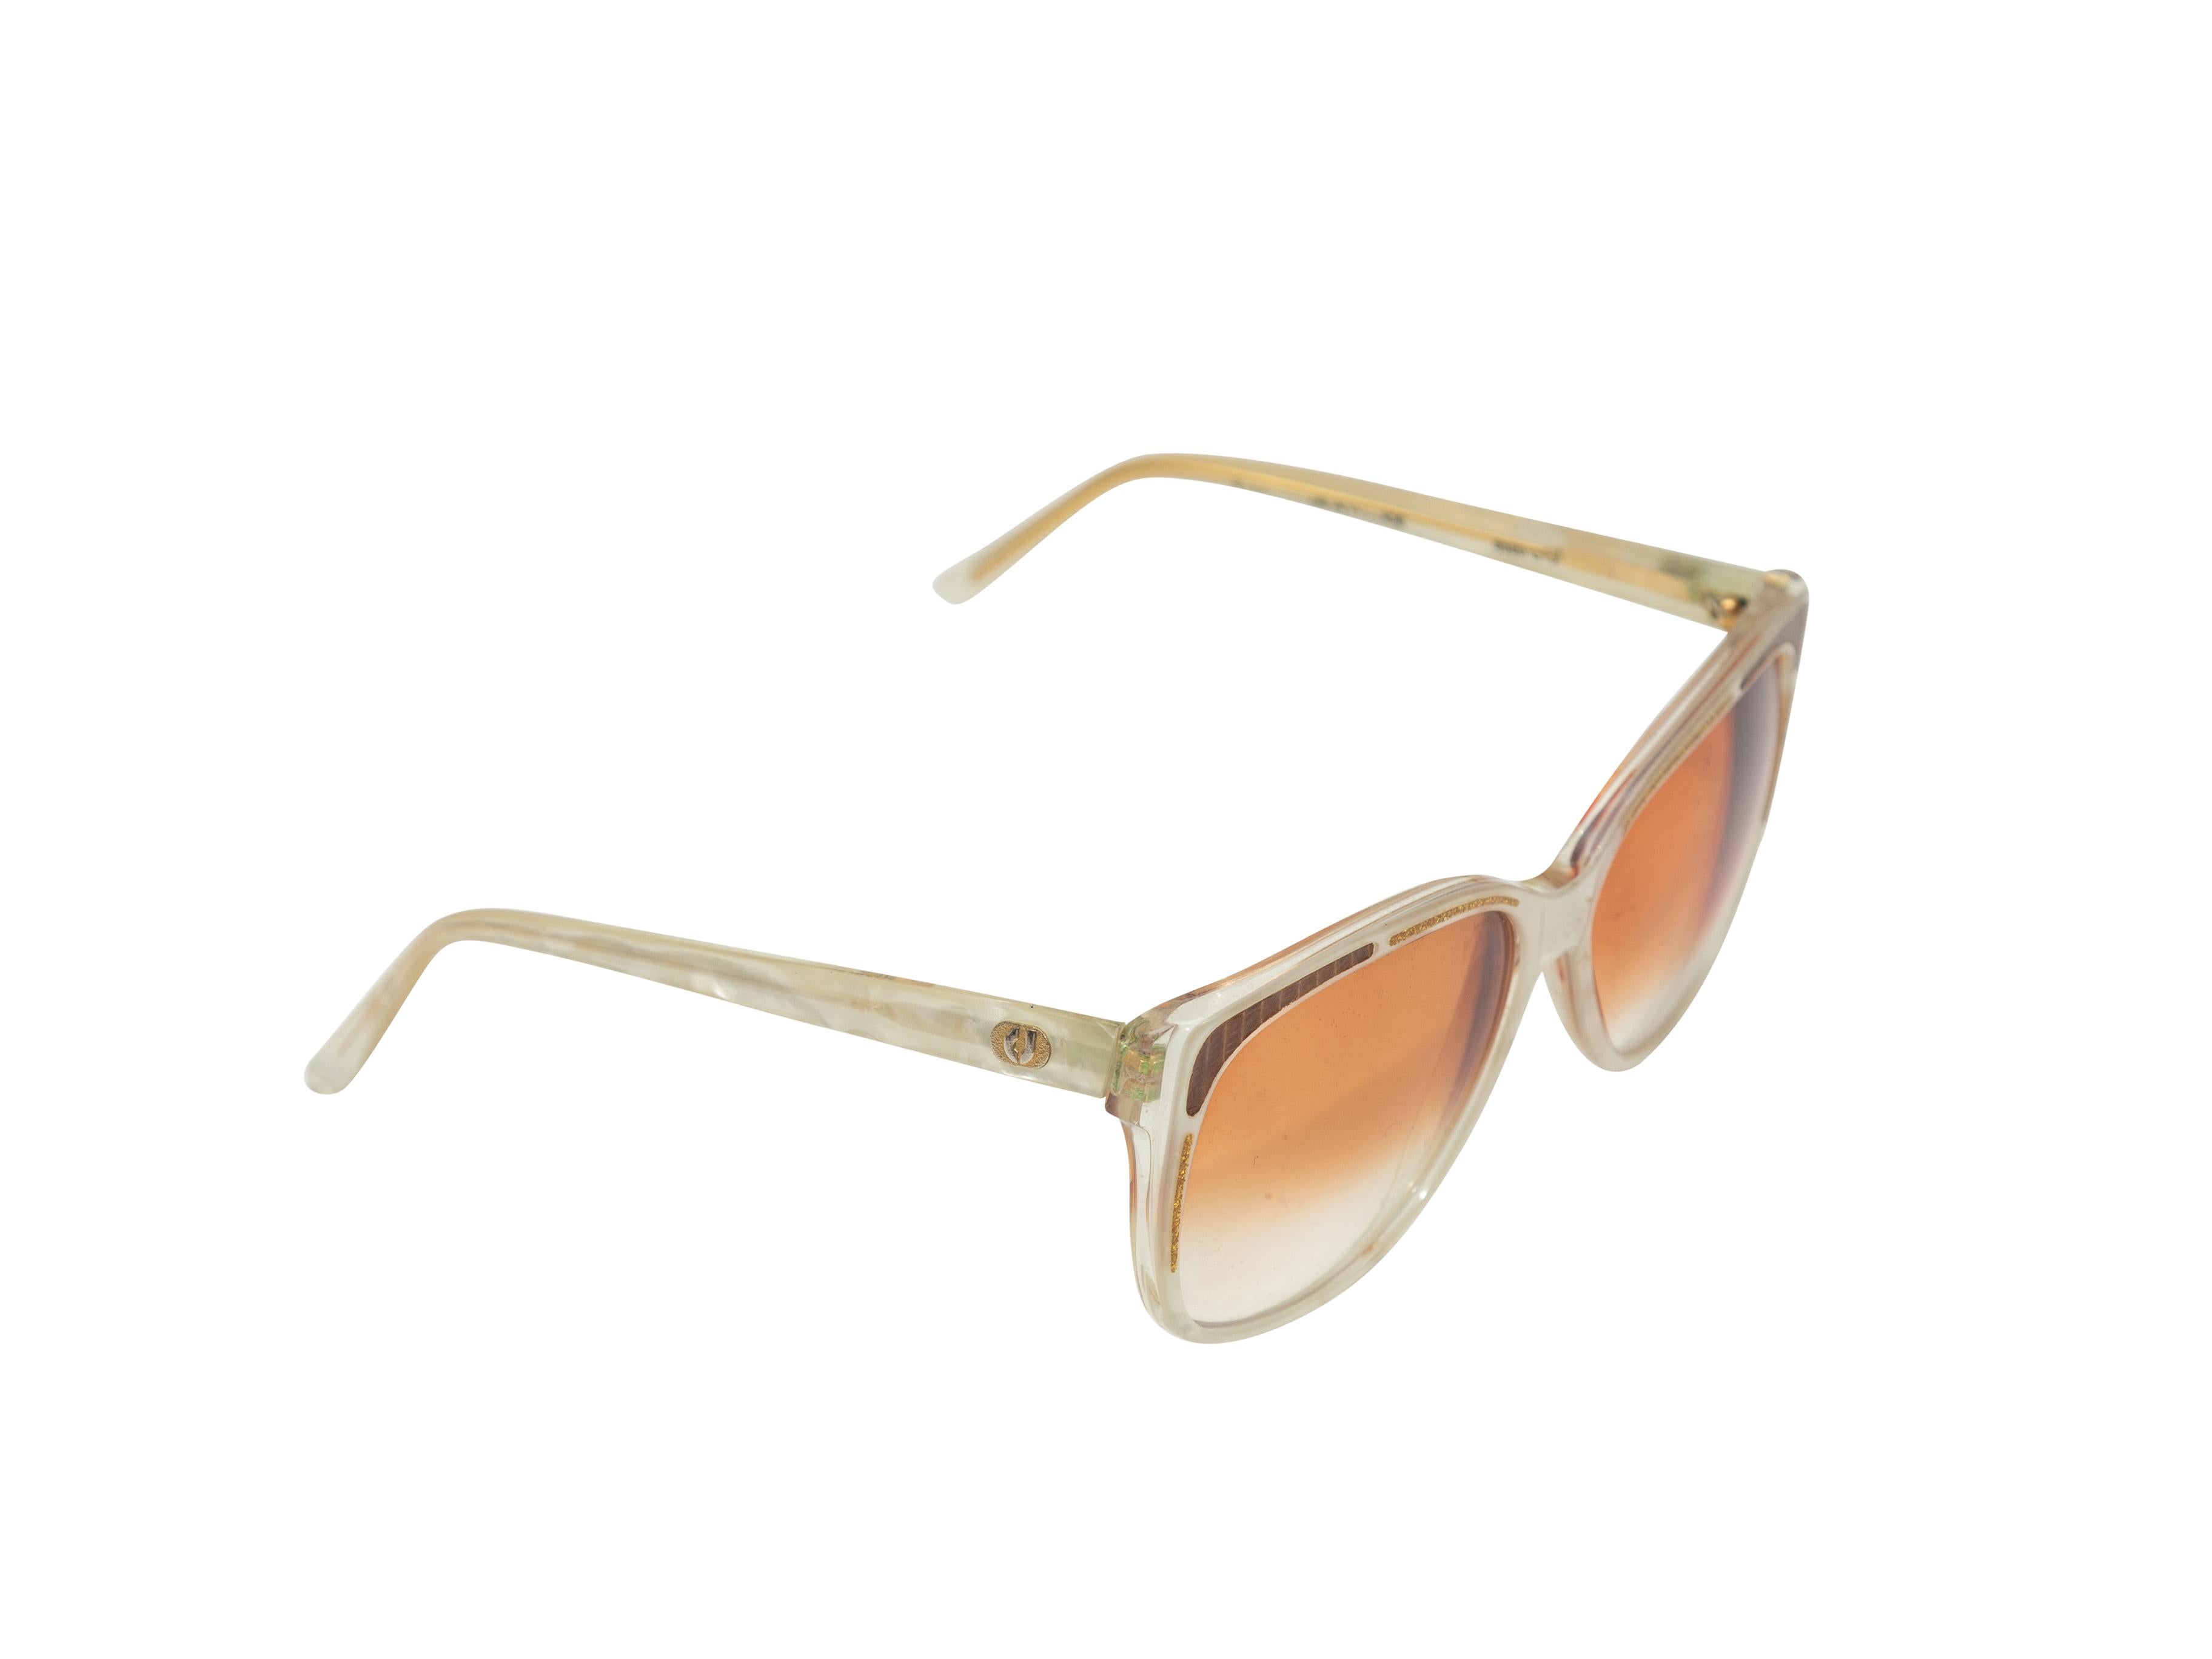 Product details: Vintage white and gold acetate sunglasses by Charles Jourdan. Gold tinted lenses. 2